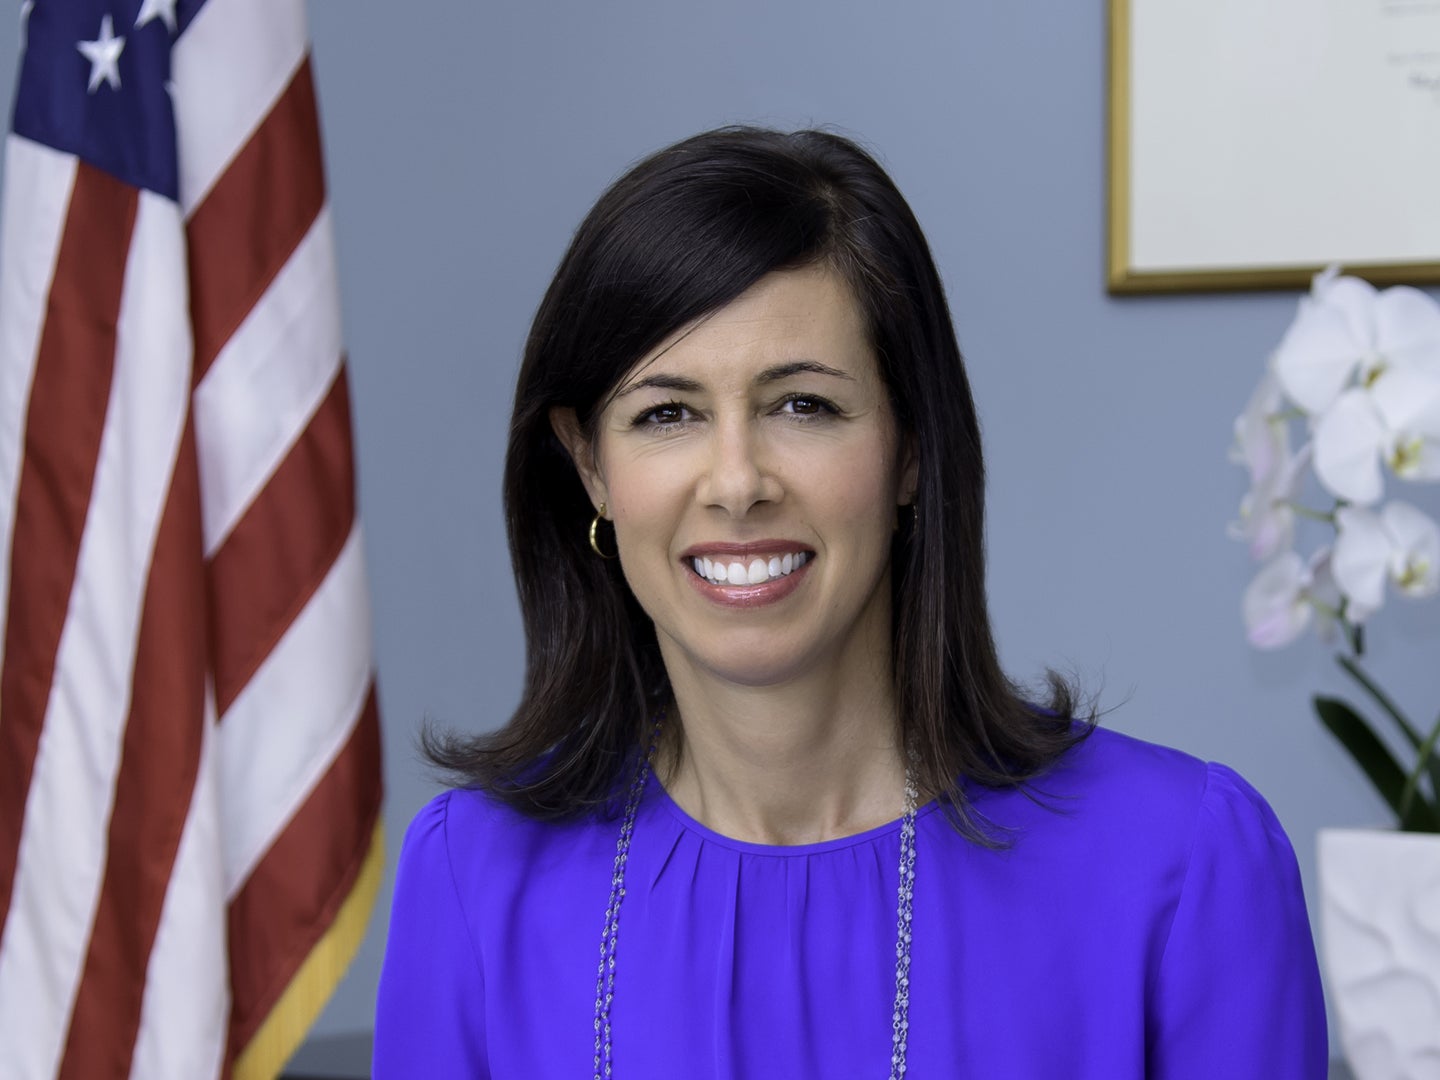 A headshot of Jessica Rosenworcel, acting chair of the FCC.